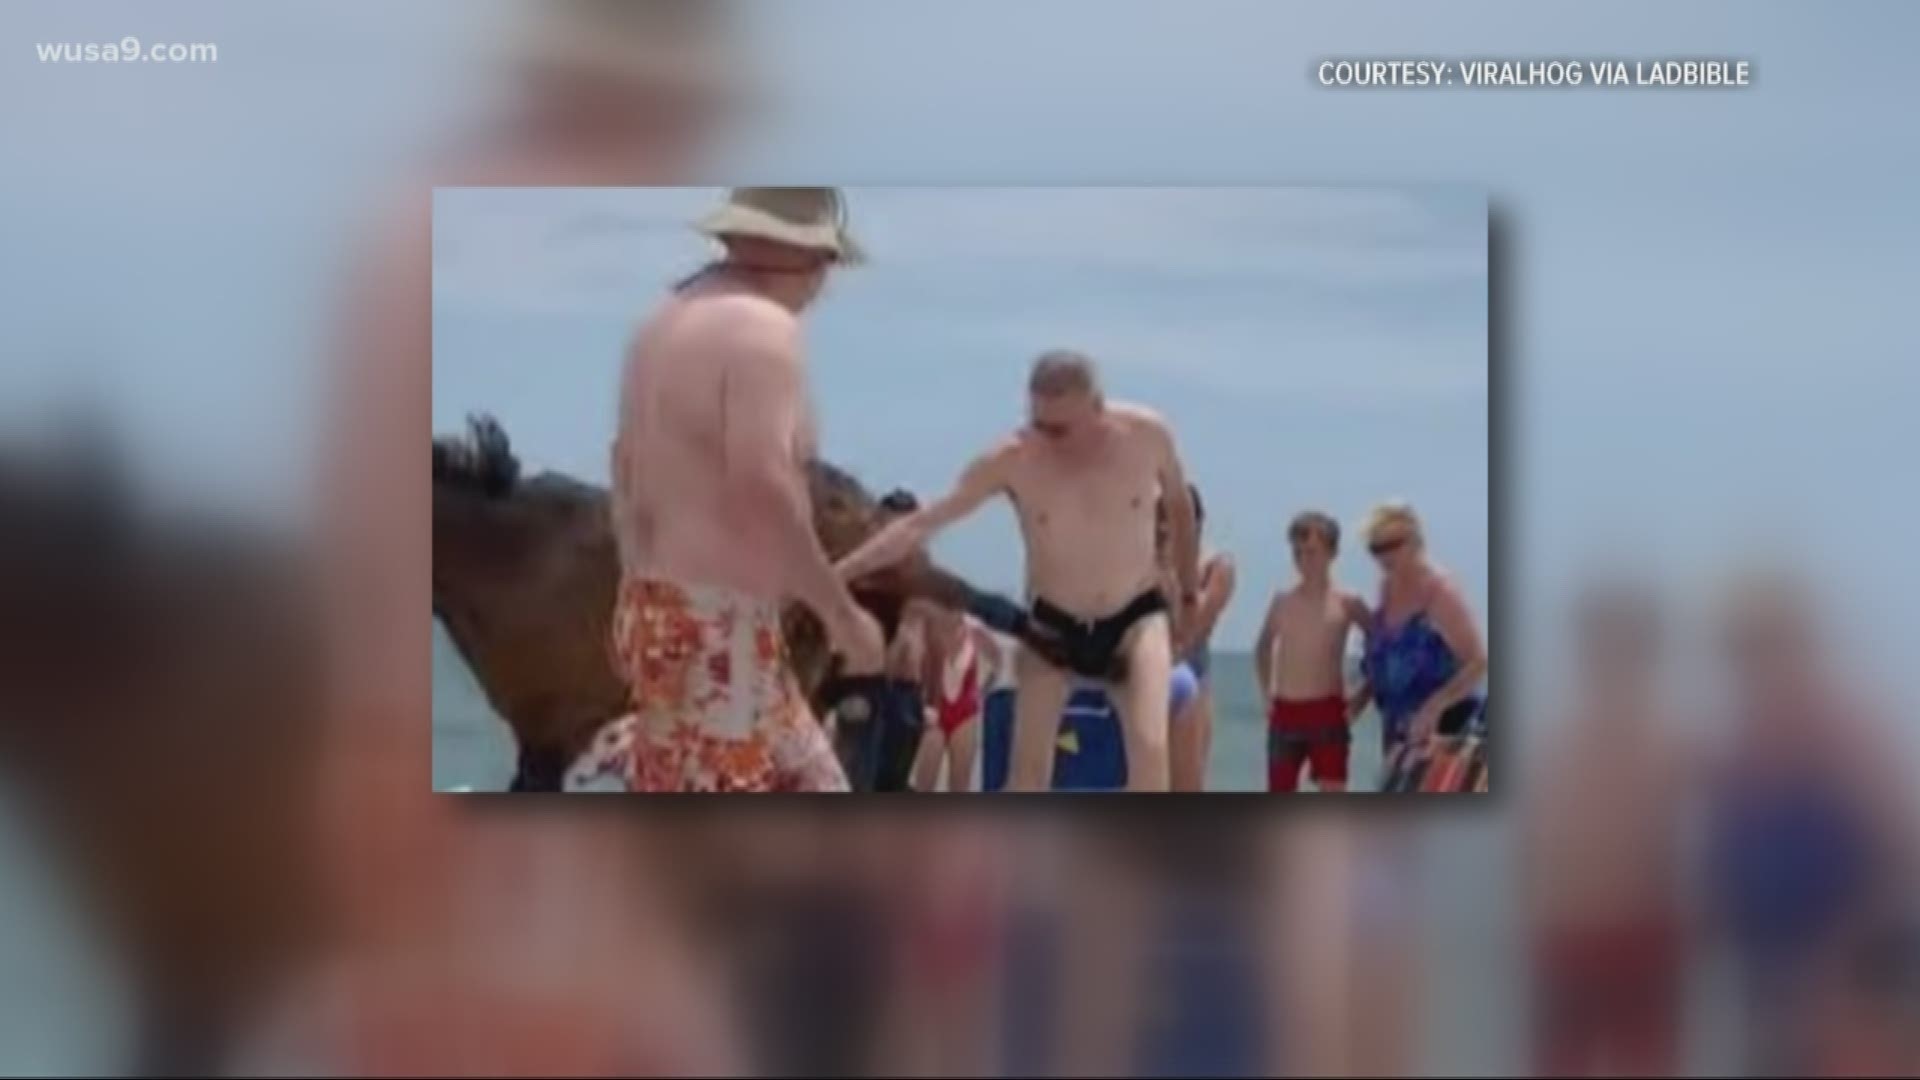 A wild horse on Assateague Island kicked a man in the groin. This is In Other News -- stories that may not be on your radar but should be.